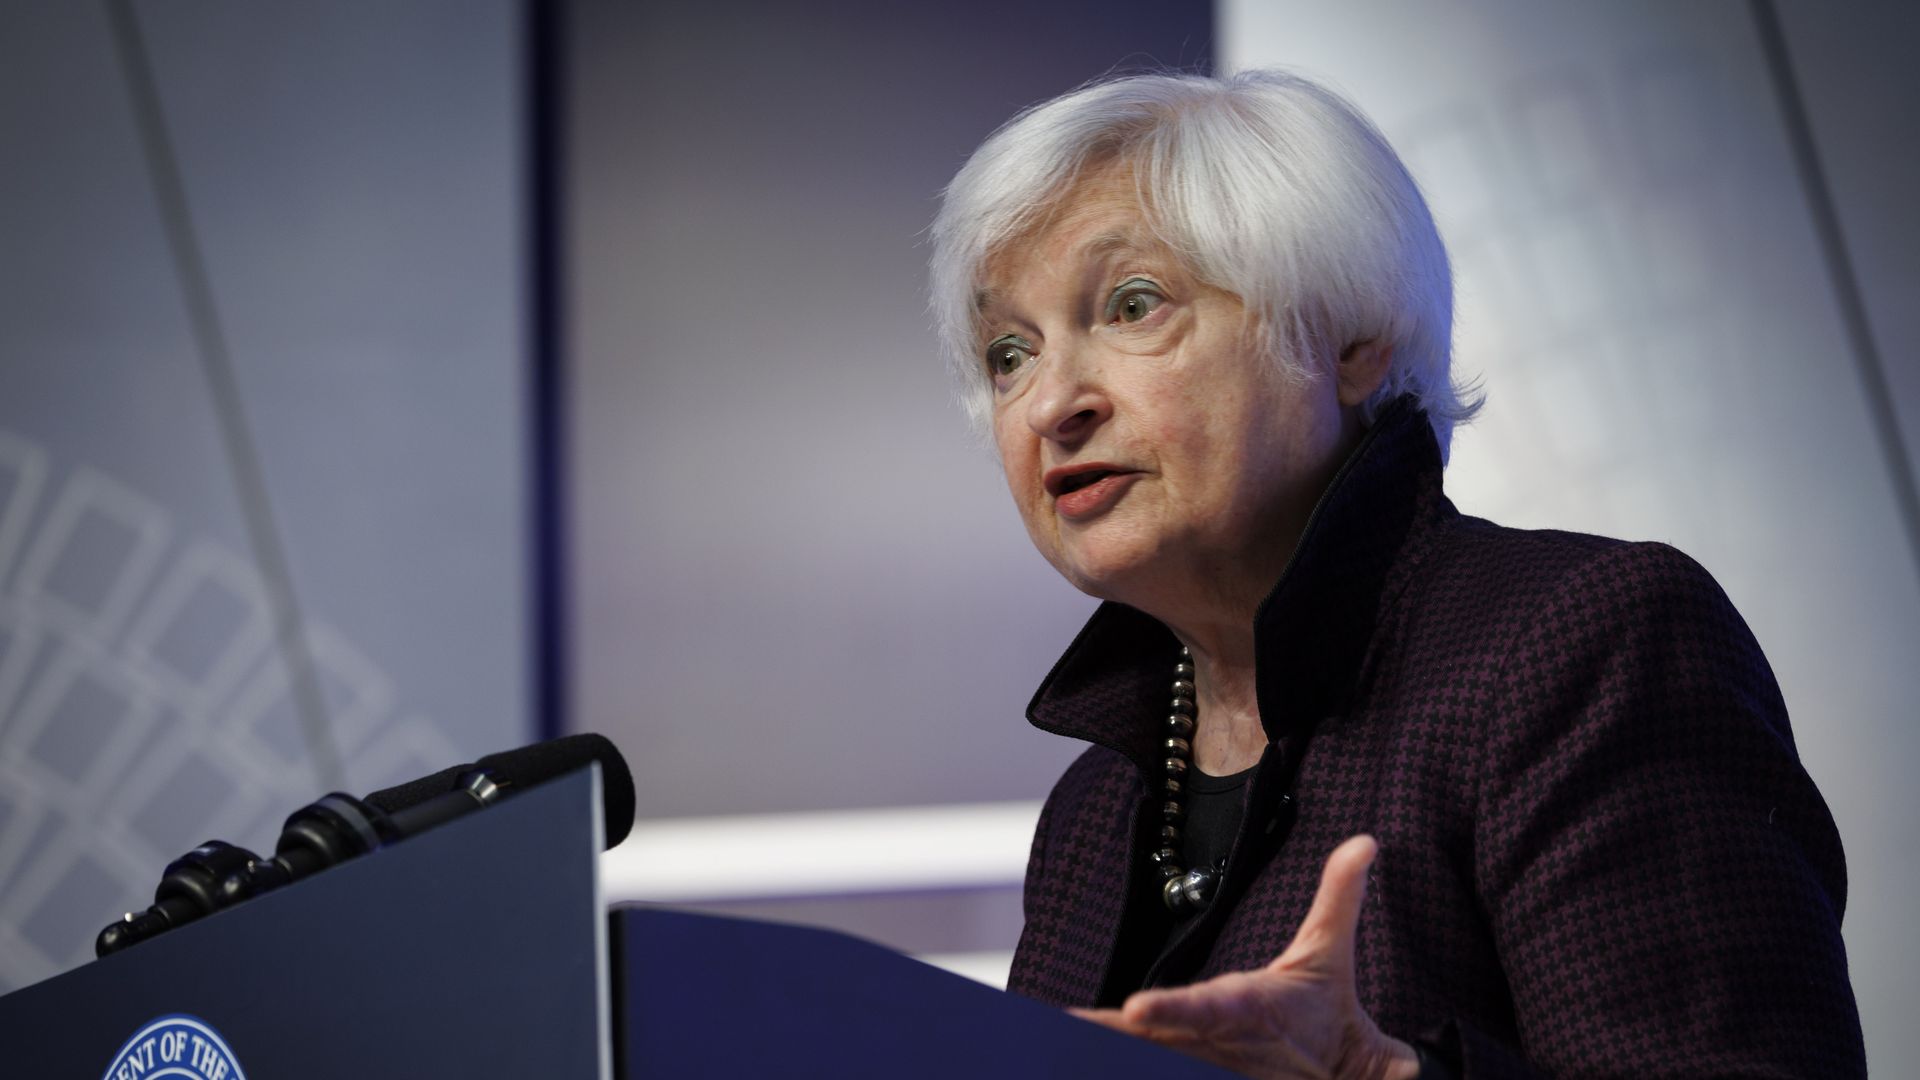 Photo of Janet Yellen speaking from a podium